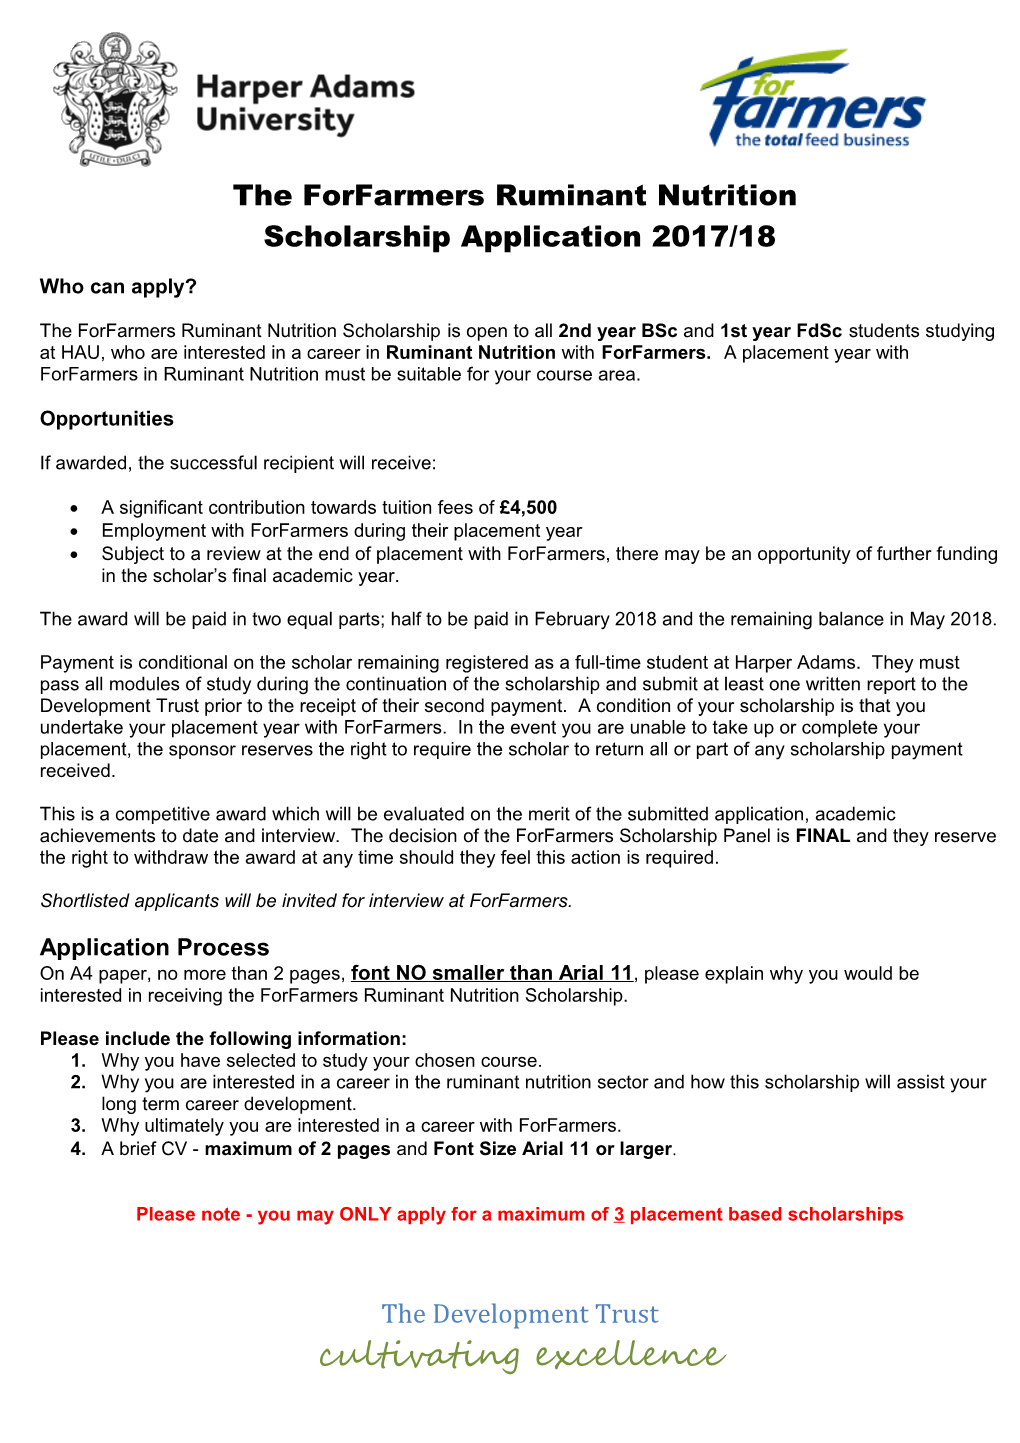 The Shropshire Group Scholarship Is Open to All Agriculture / Agriculture Engineering 1St